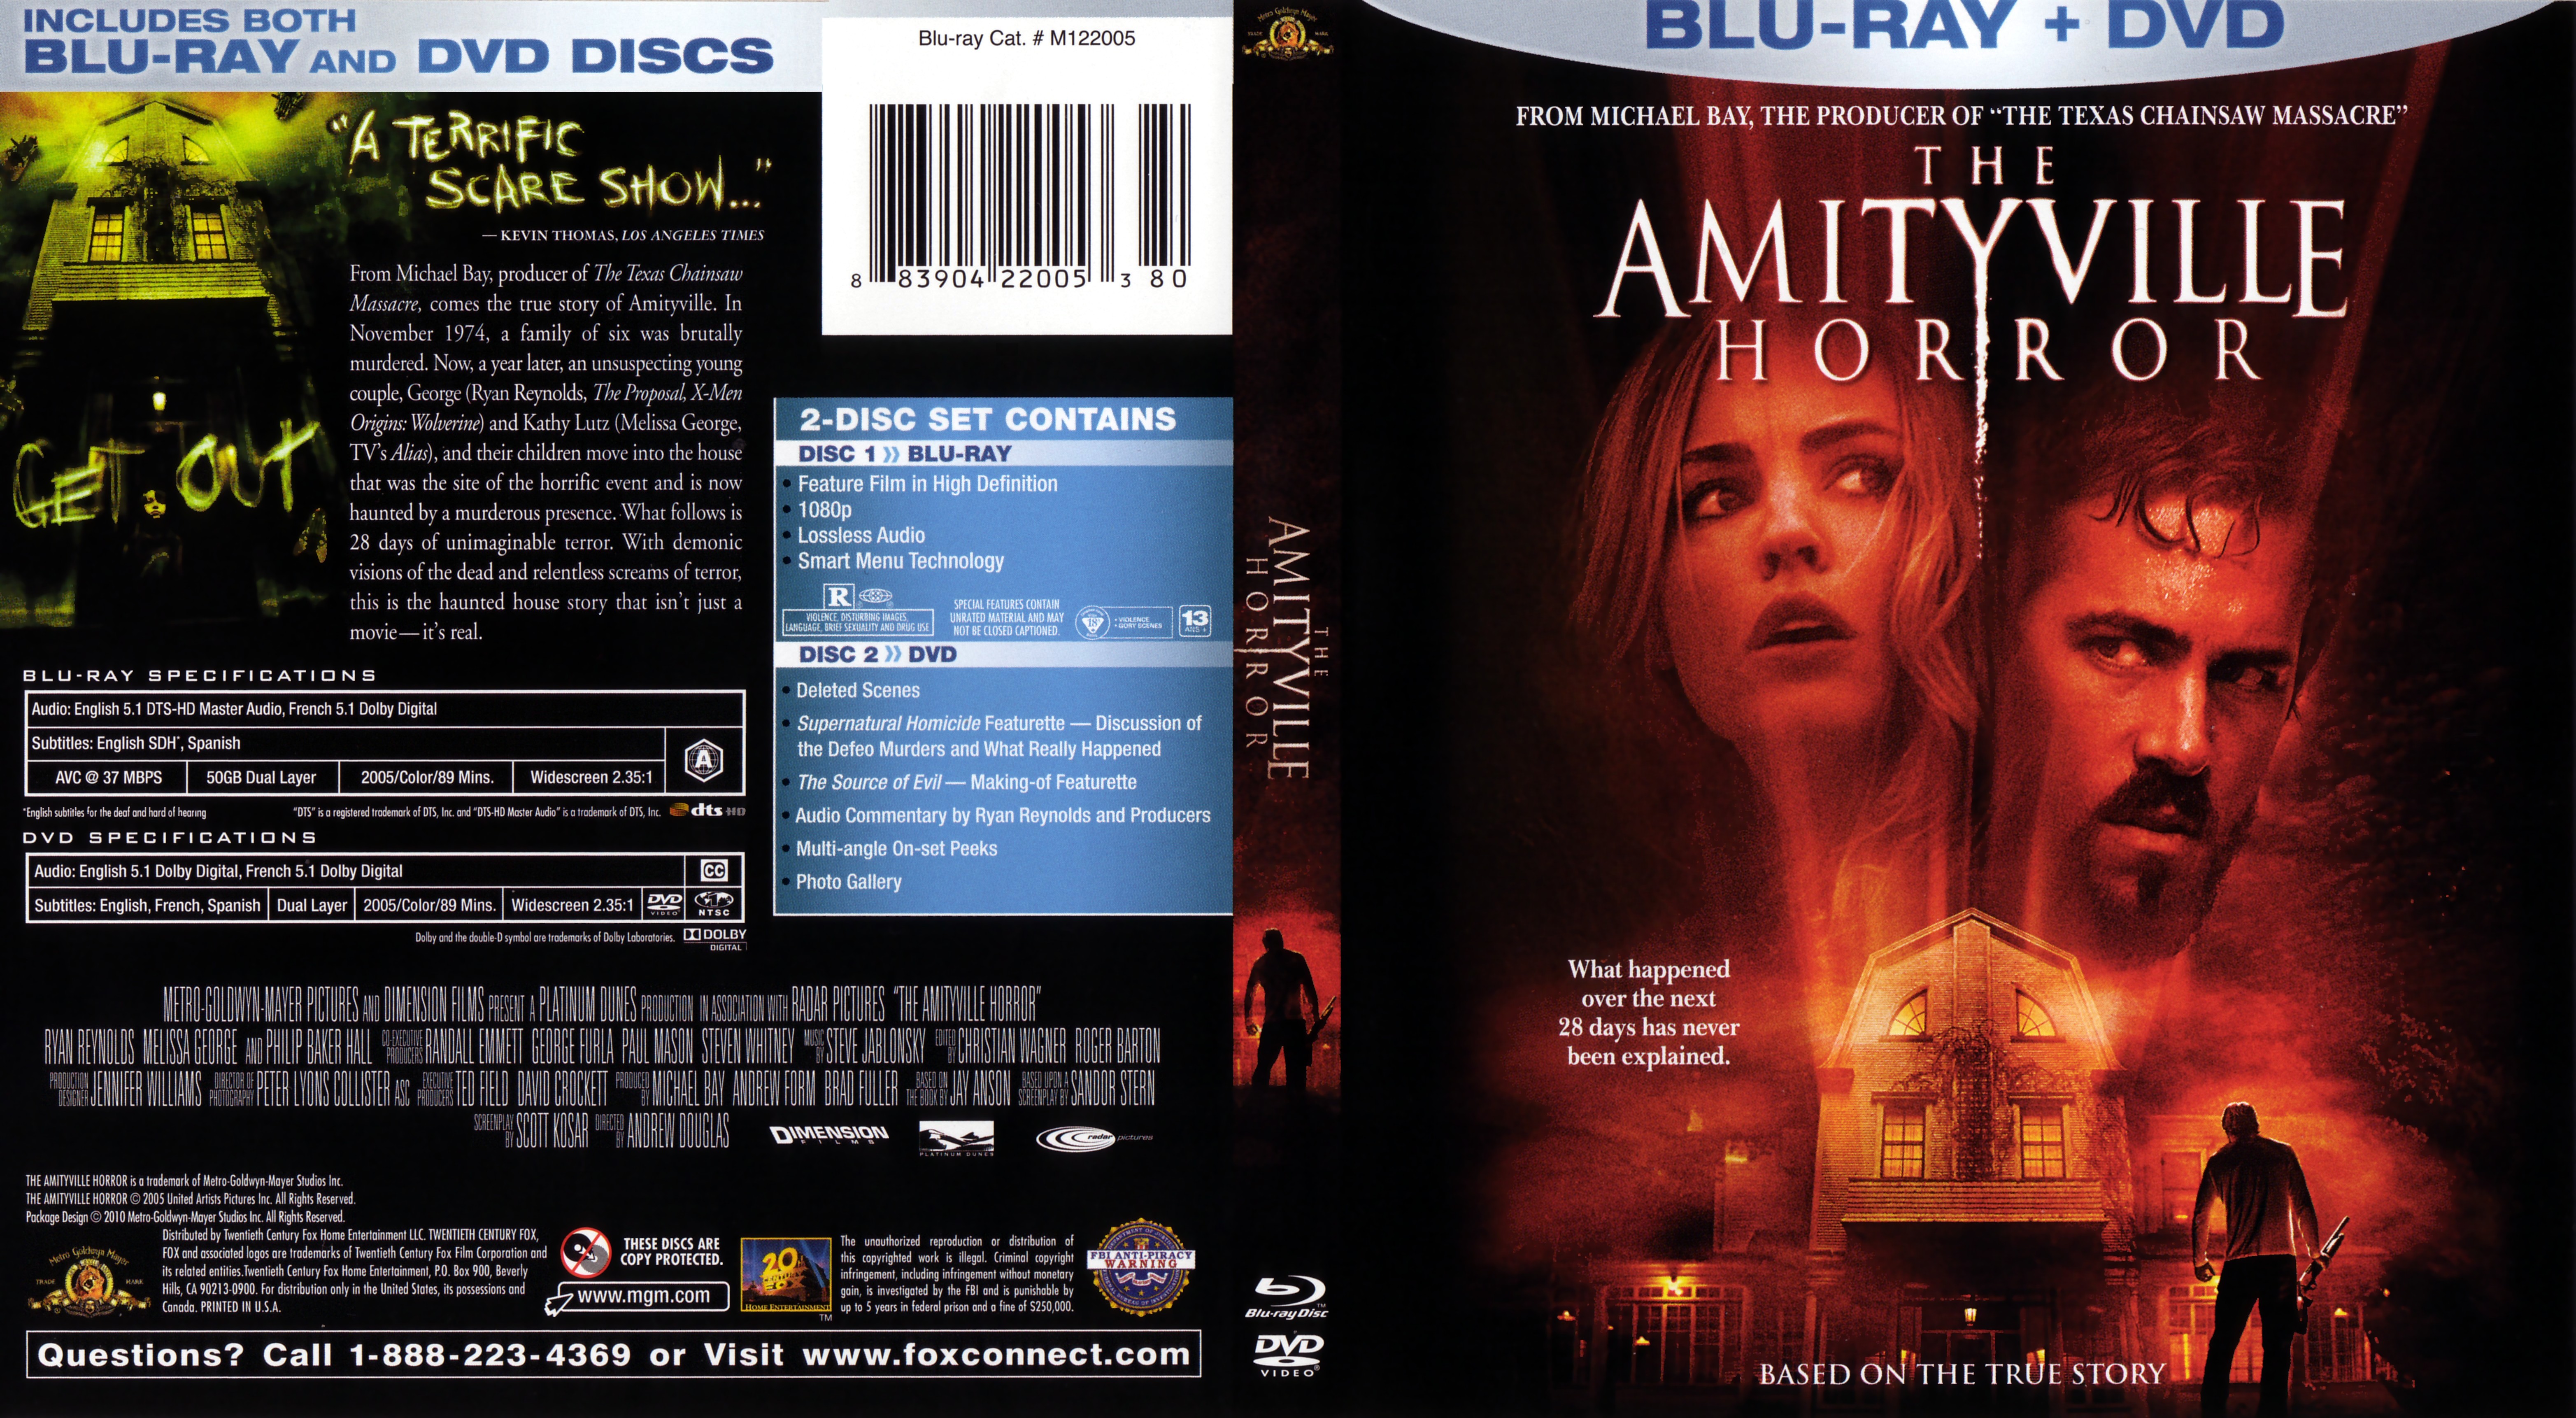 Jaquette DVD The Amityville Horror (2005) Zone 1 (BLU-RAY)